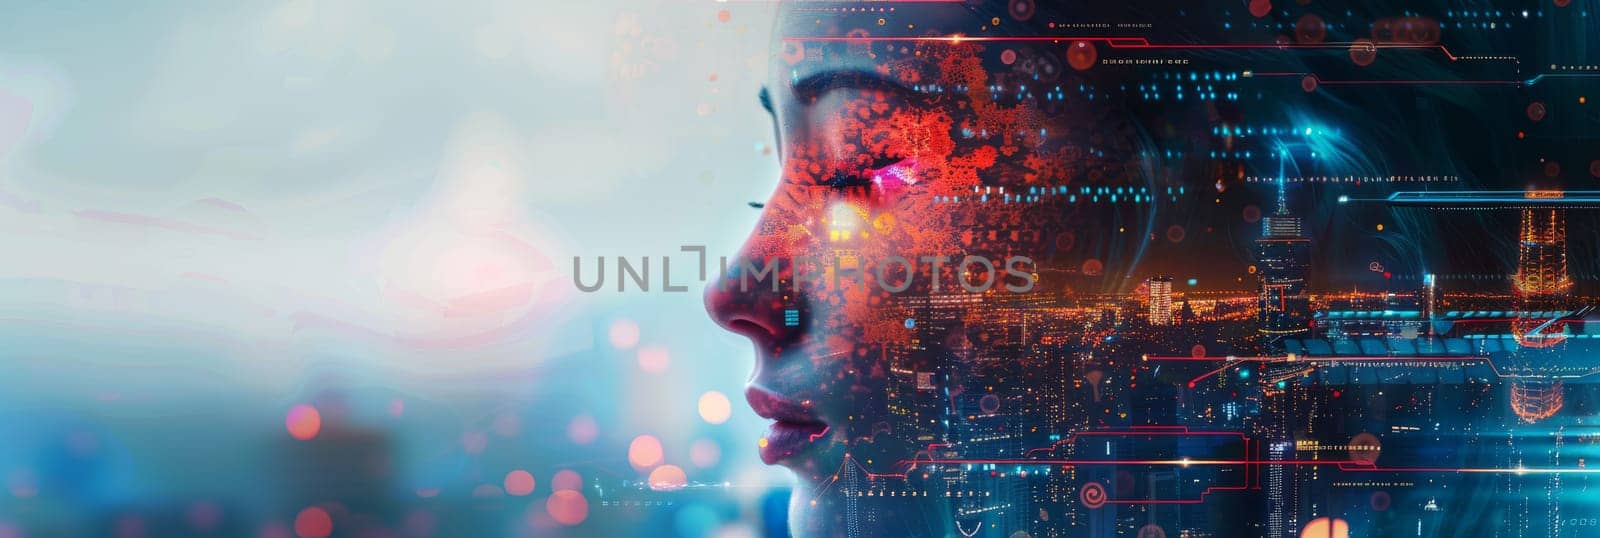 A woman's face is shown in a cityscape with a futuristic look by AI generated image.